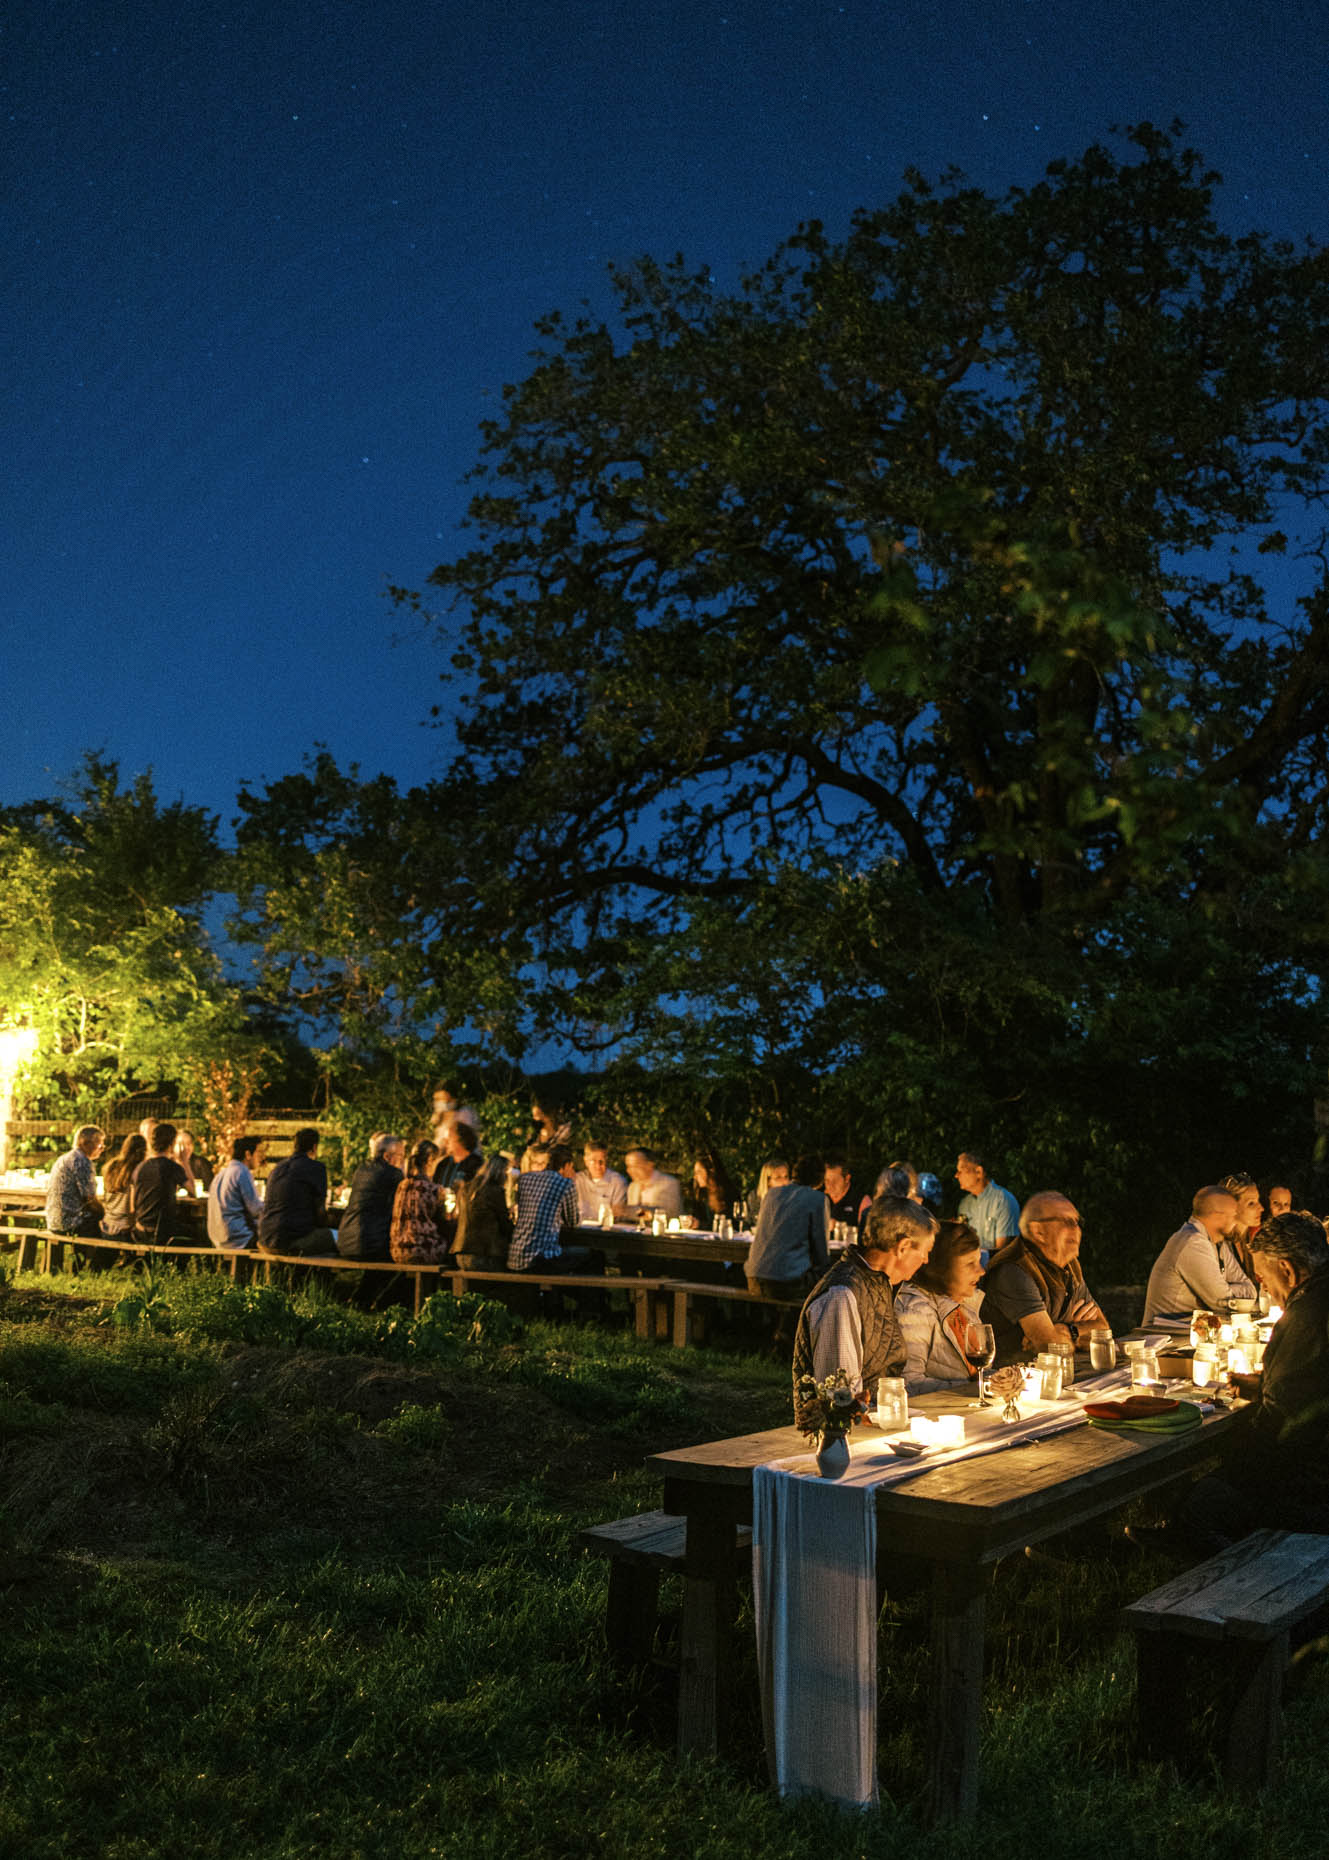 outdoor evening dining experience under the stars in texas